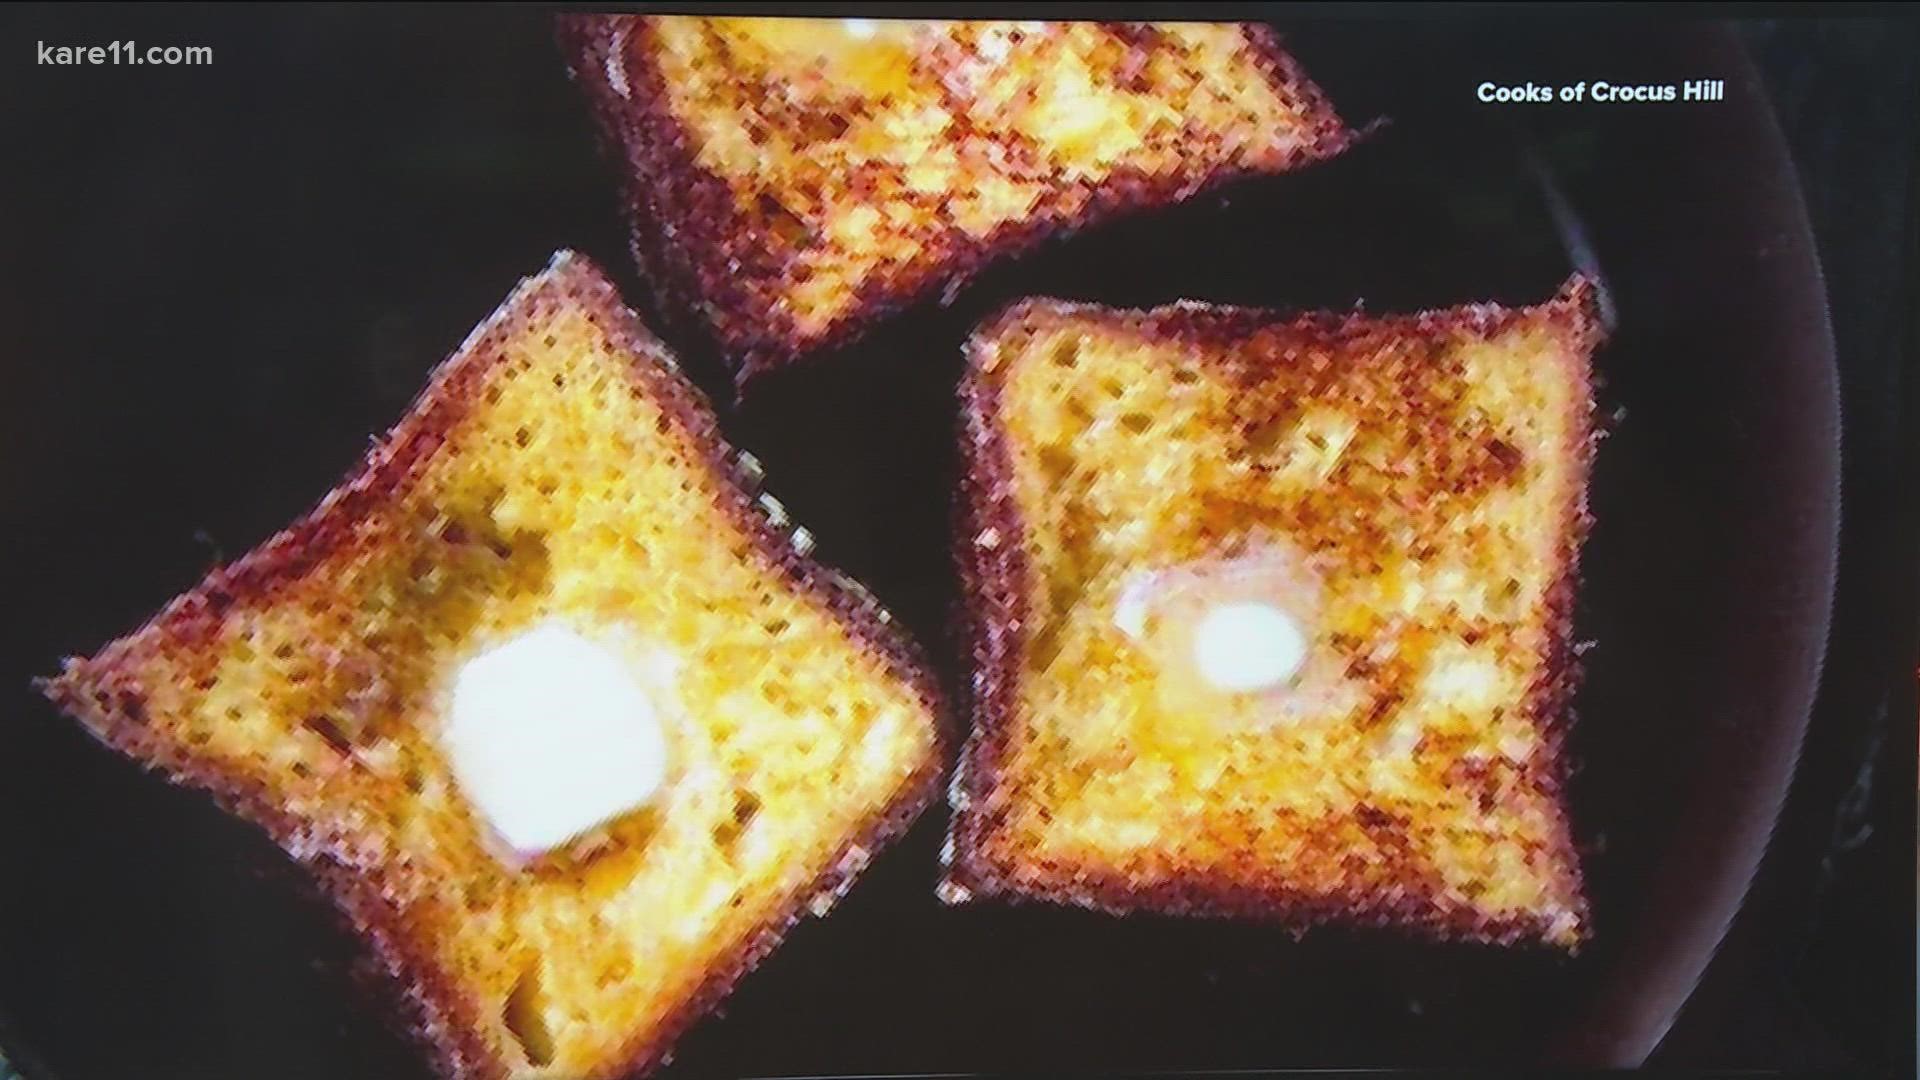 In France, French toast is called "Pain perdu," which means "lost bread," it was a dish people made as a way to use stale bread so nothing went to waste.